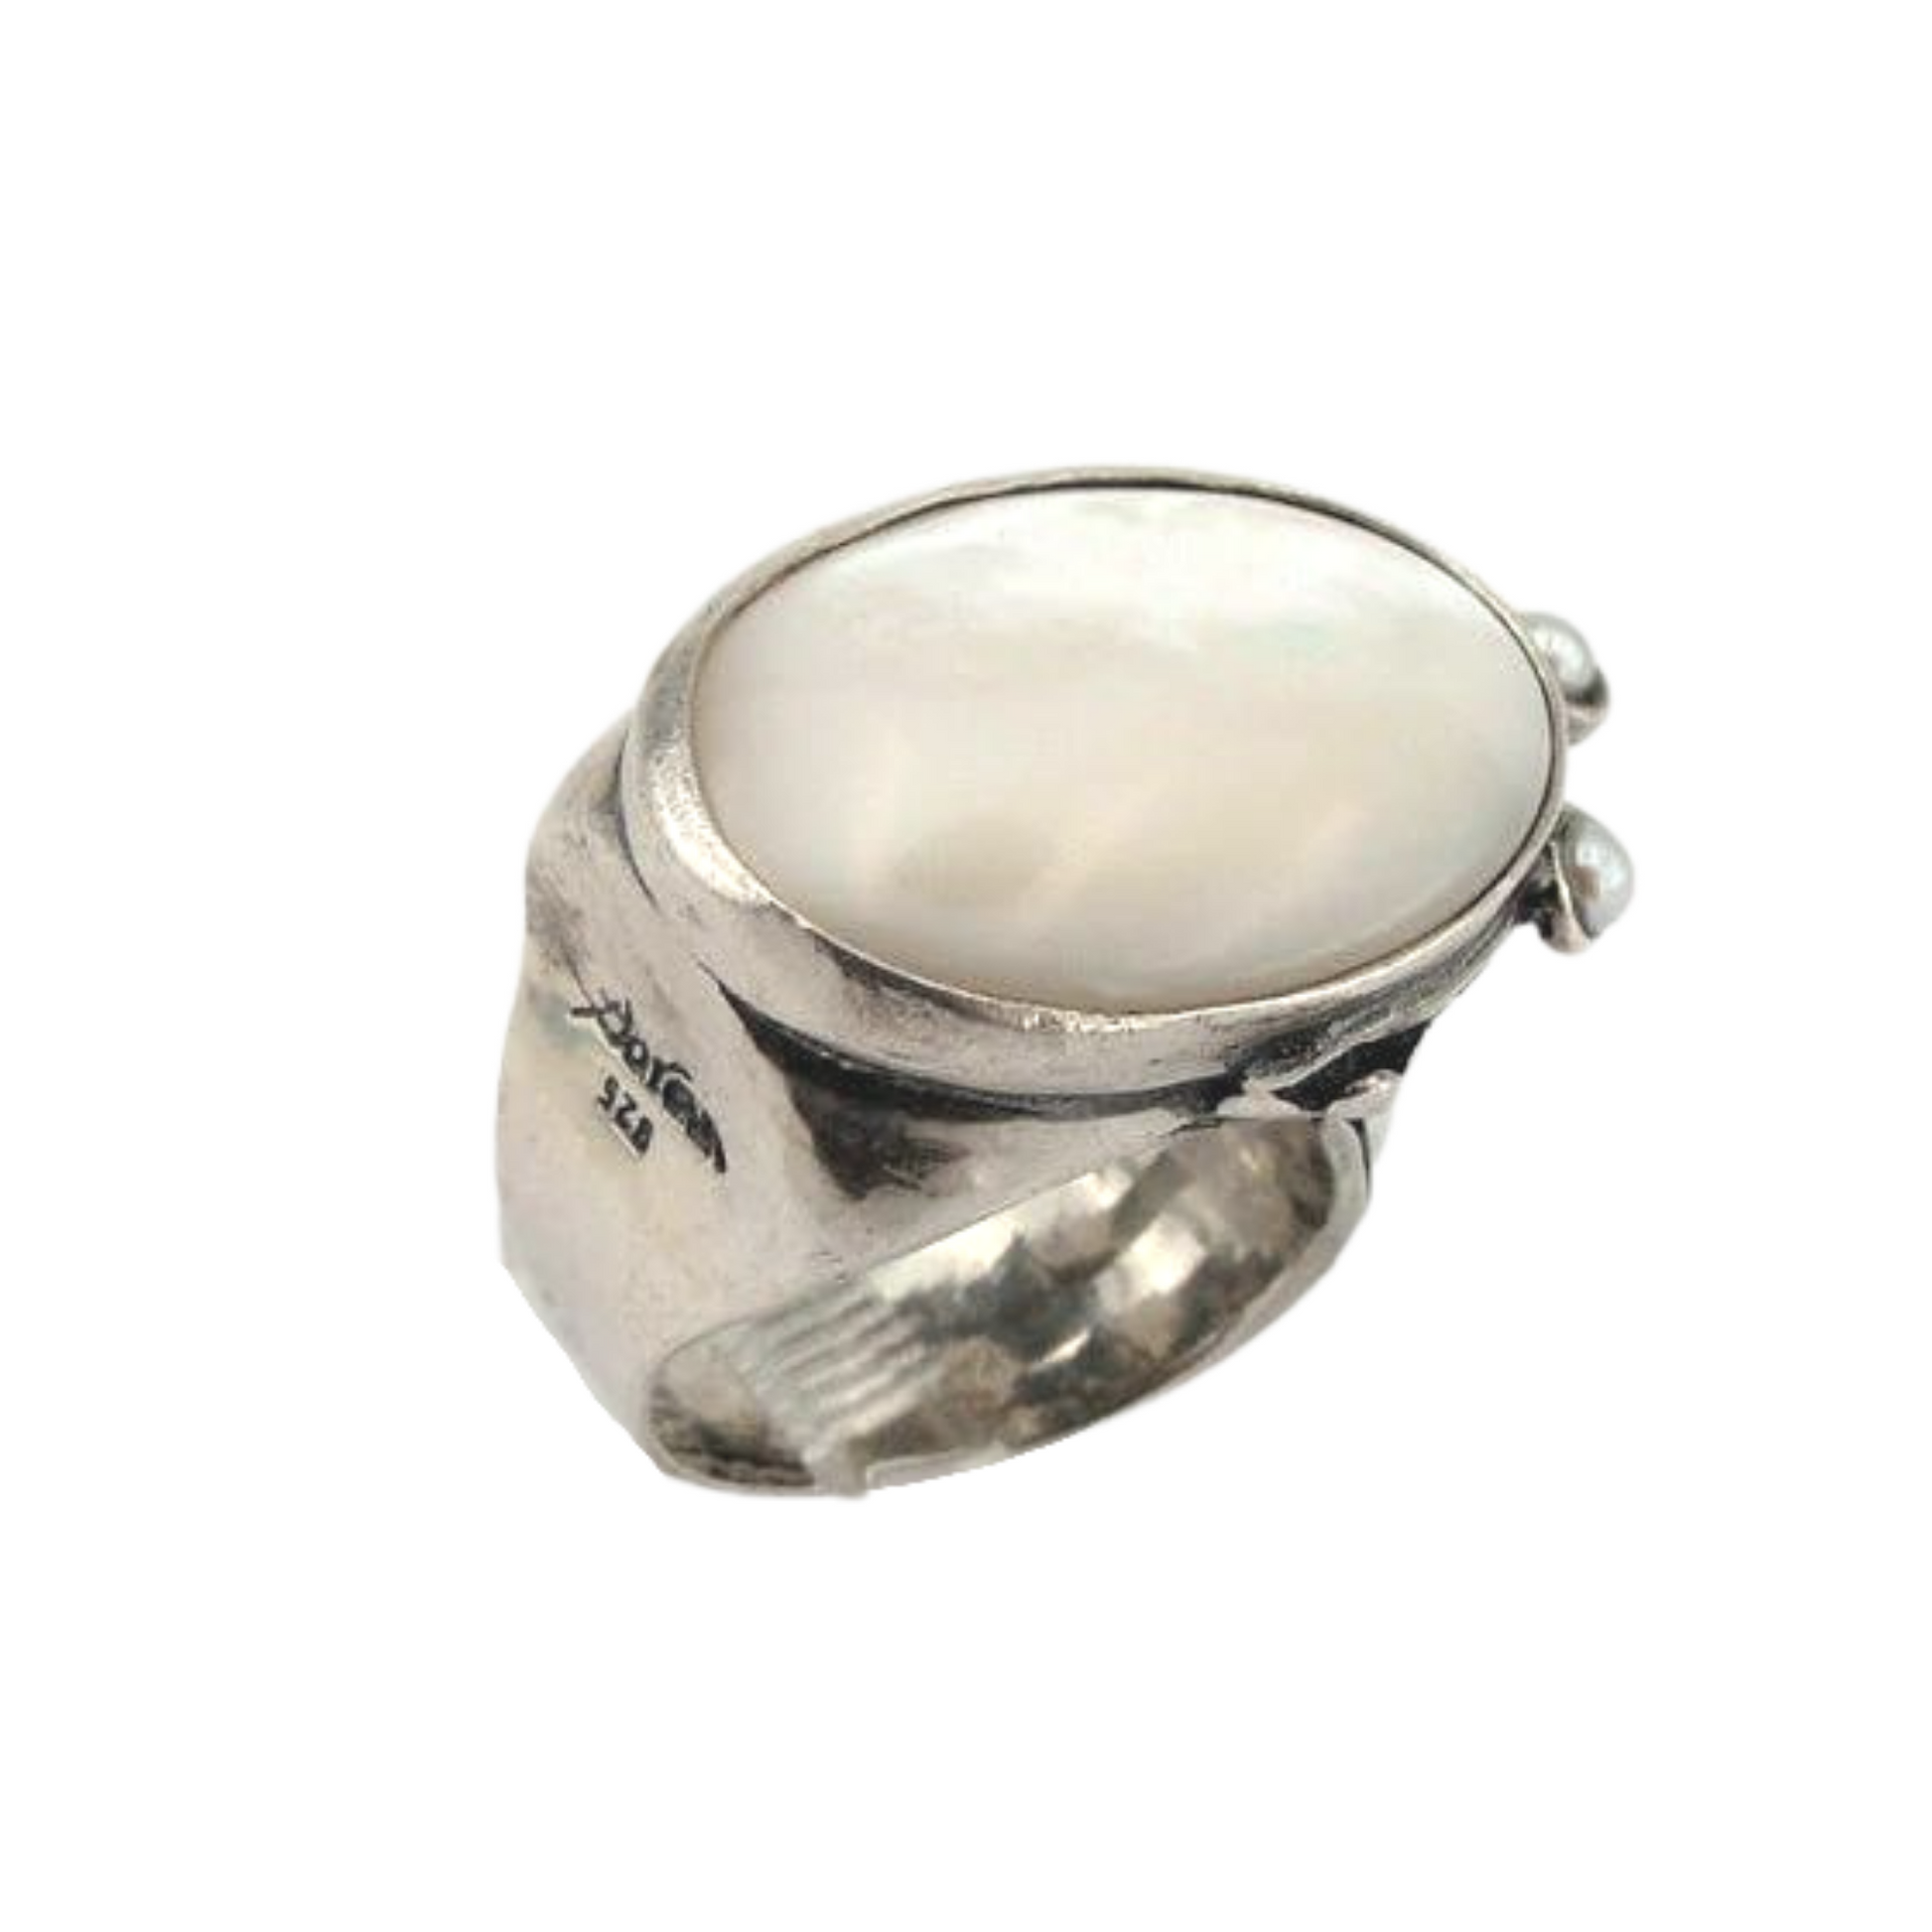 Bold Ring With a Statement Big Mother of pearl Gemstone, a Solid Sterling Silver Ring. Jewelry for men and women, statement ring, bold ring, unisex ring, men ring, man ring, women ring, gift for her, gift for him, Pearl ring, Multiple gemstone ring